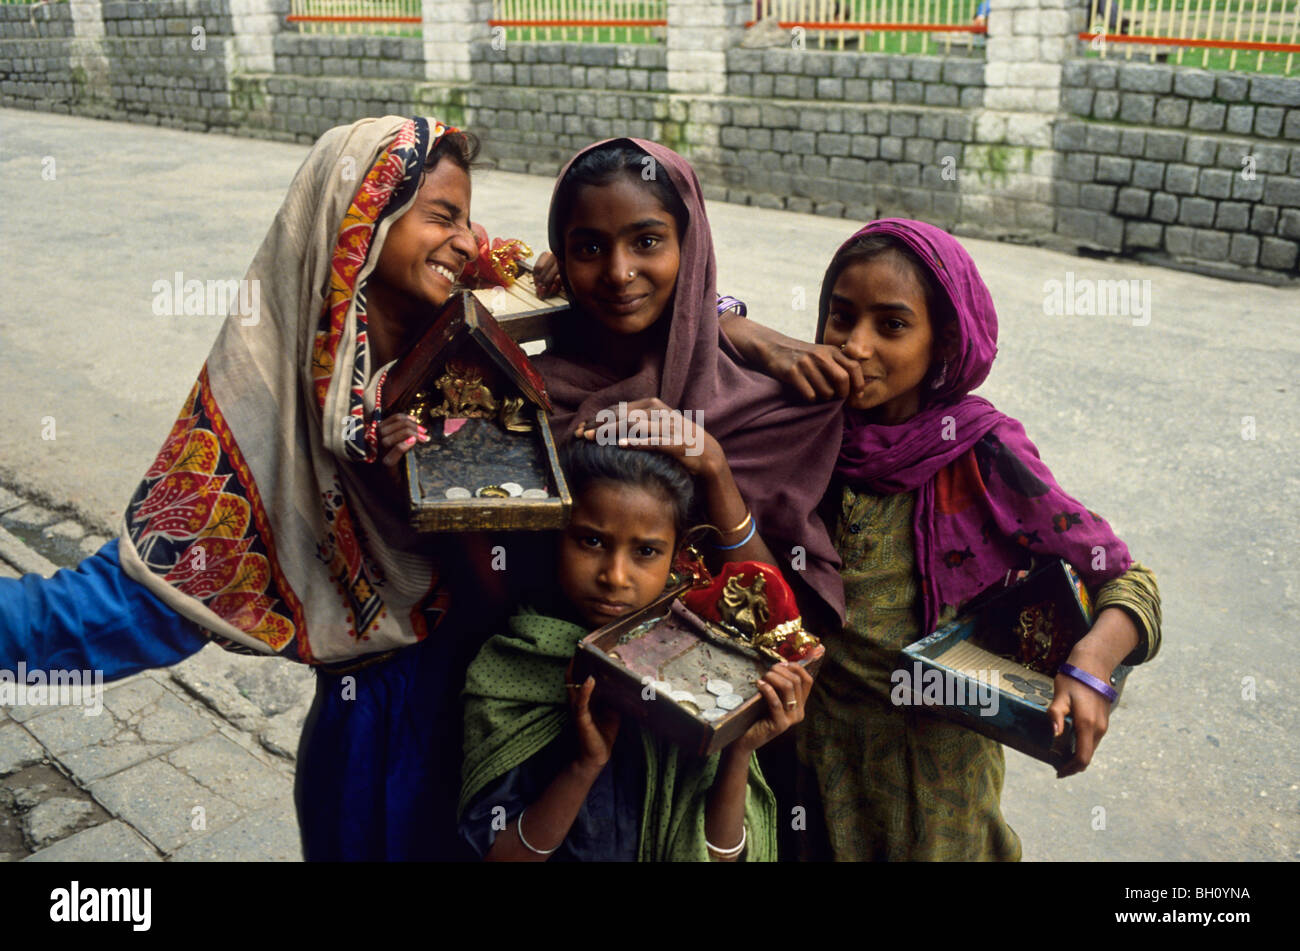 Four young girls are begging in a street of New Delhi. Stock Photo